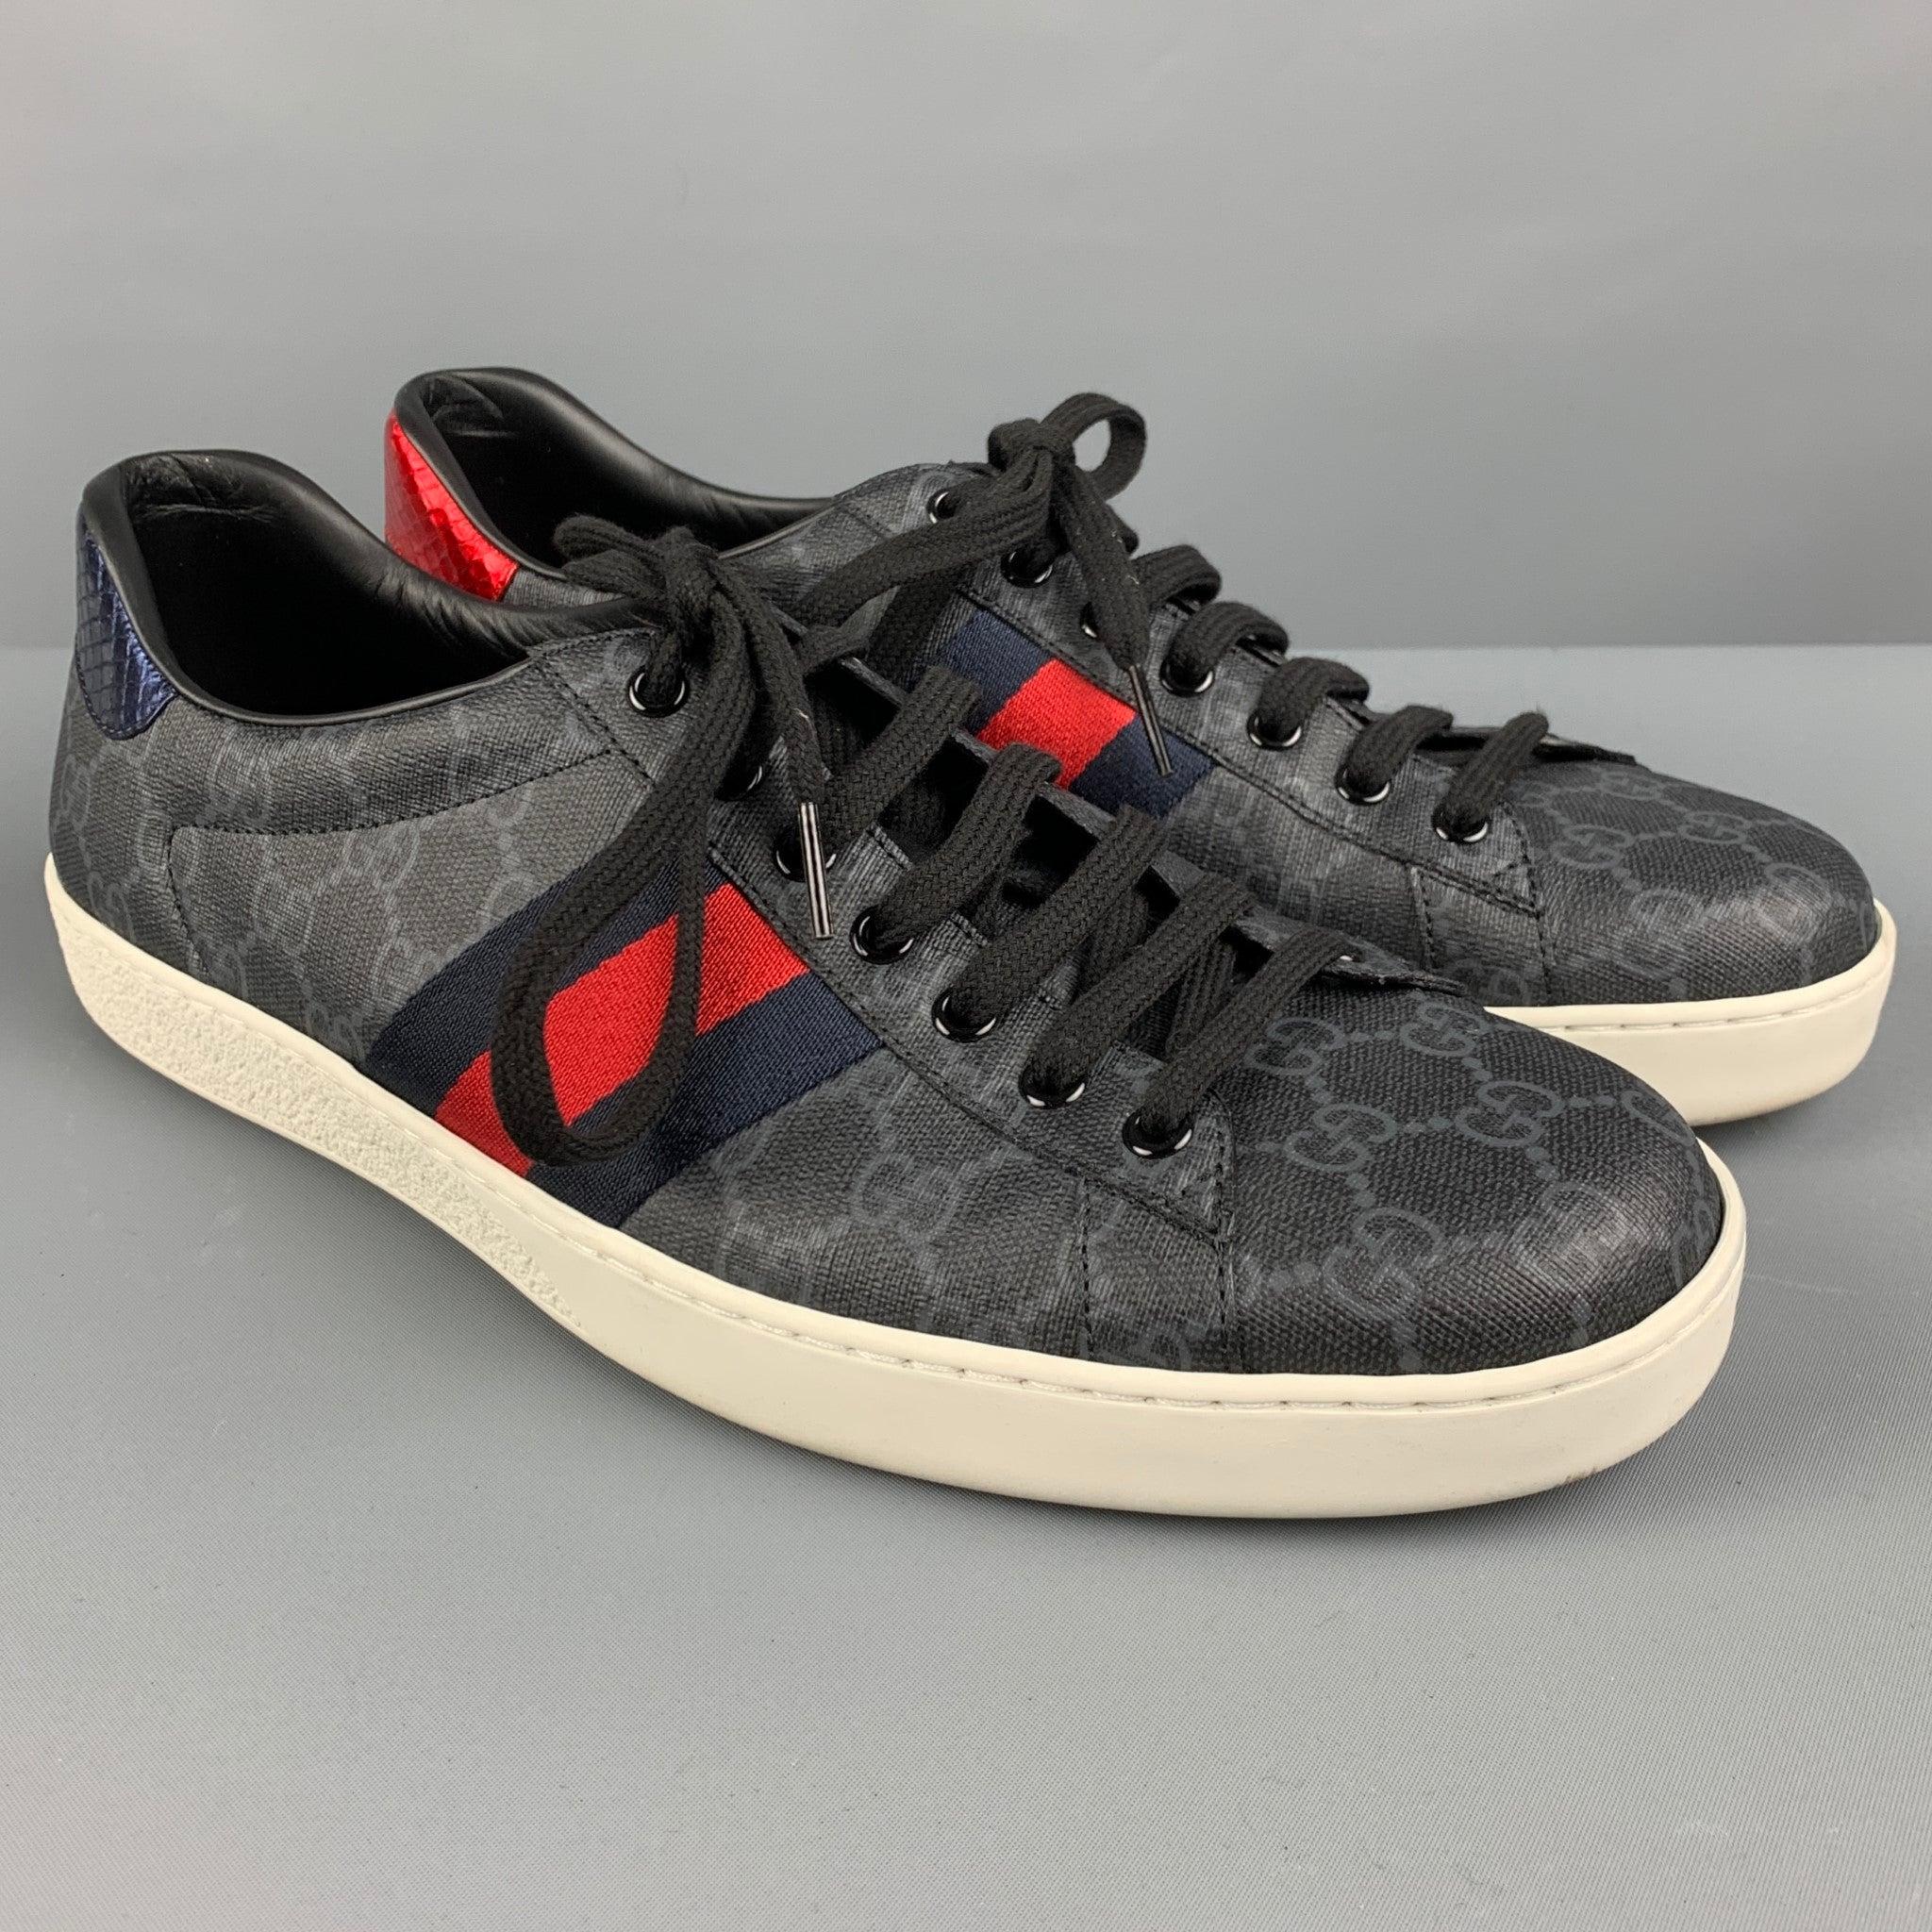 GUCCI sneakers
in a black leather featuring signature grey monogram pattern, red and blue color block stripes, contrast scale pattern heels, and lace up closure. Made in Italy. Very Good Pre-Owned Condition. Minor signs of wear. 

Marked:   429 443